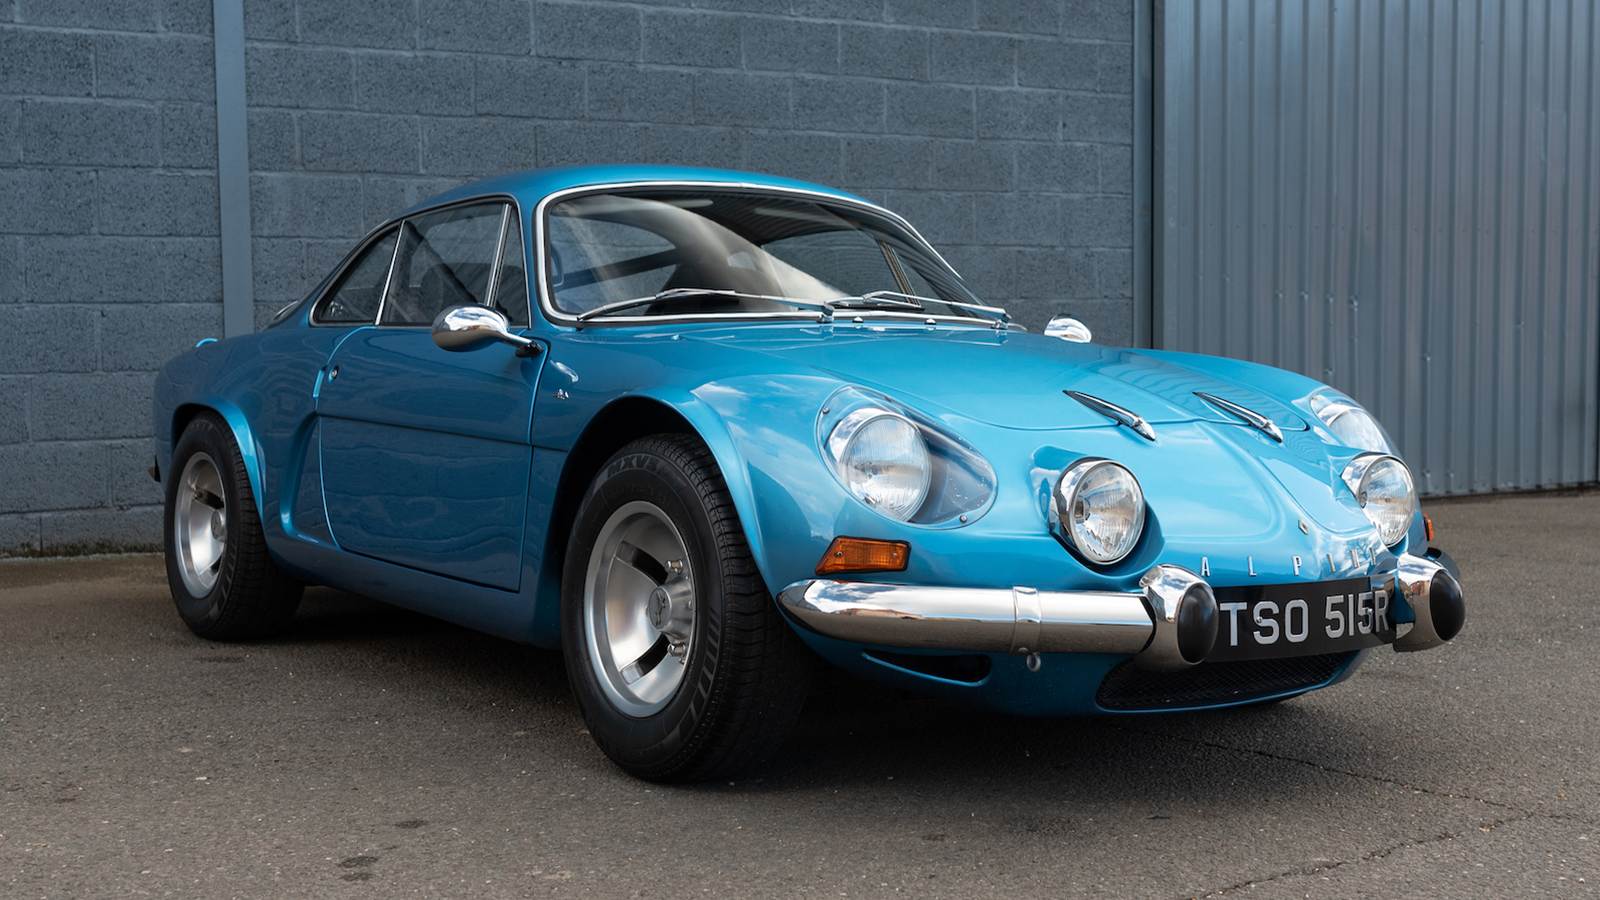 12 special Renaults for sale now | Classic & Sports Car